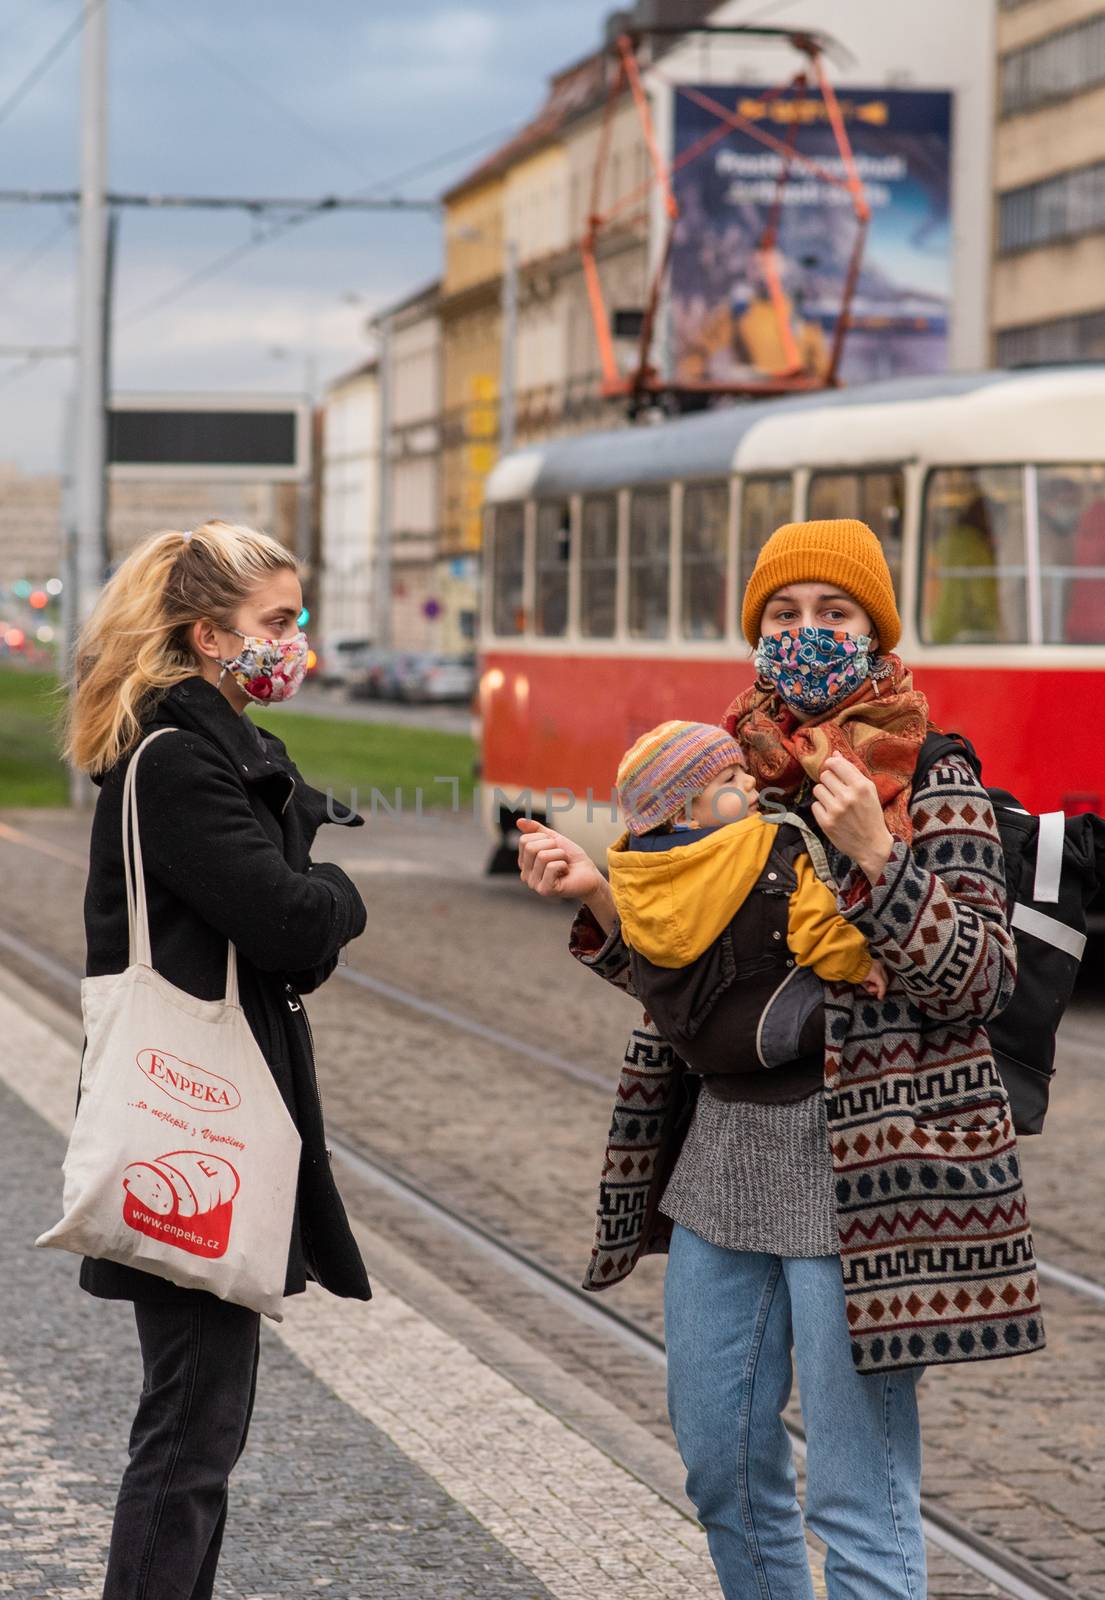 11-23-2020. Prague, Czech Republic. People walking and talking outside during coronavirus (COVID-19) at Hradcanska metro stop in Prague 6. Mother and child waiting tram.